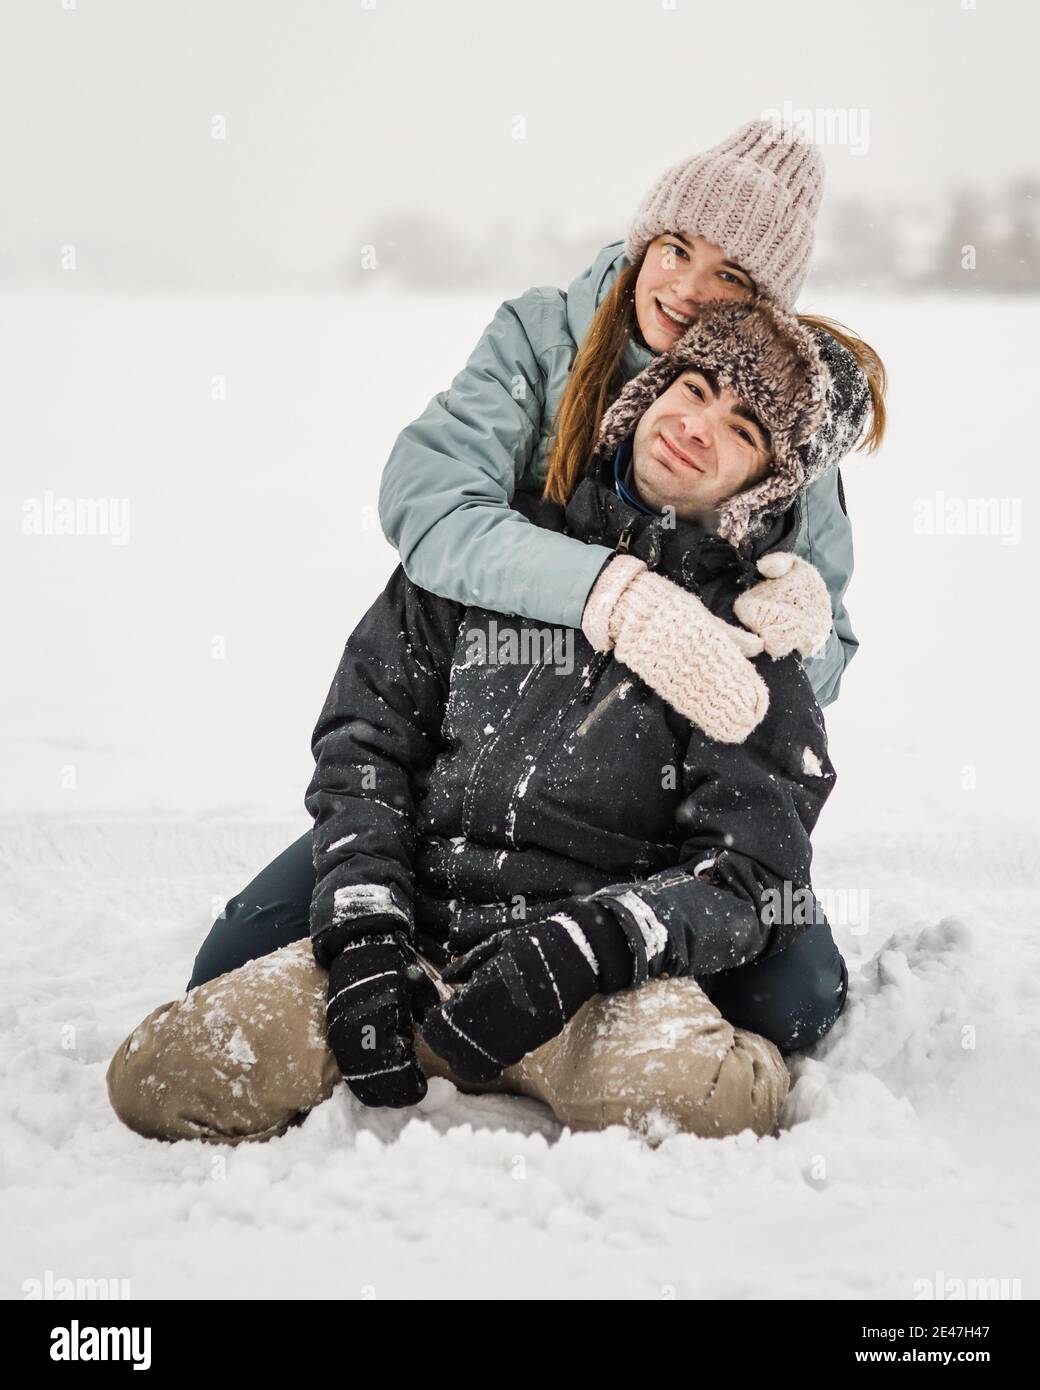 167,042 Couple Snow Royalty-Free Photos and Stock Images | Shutterstock